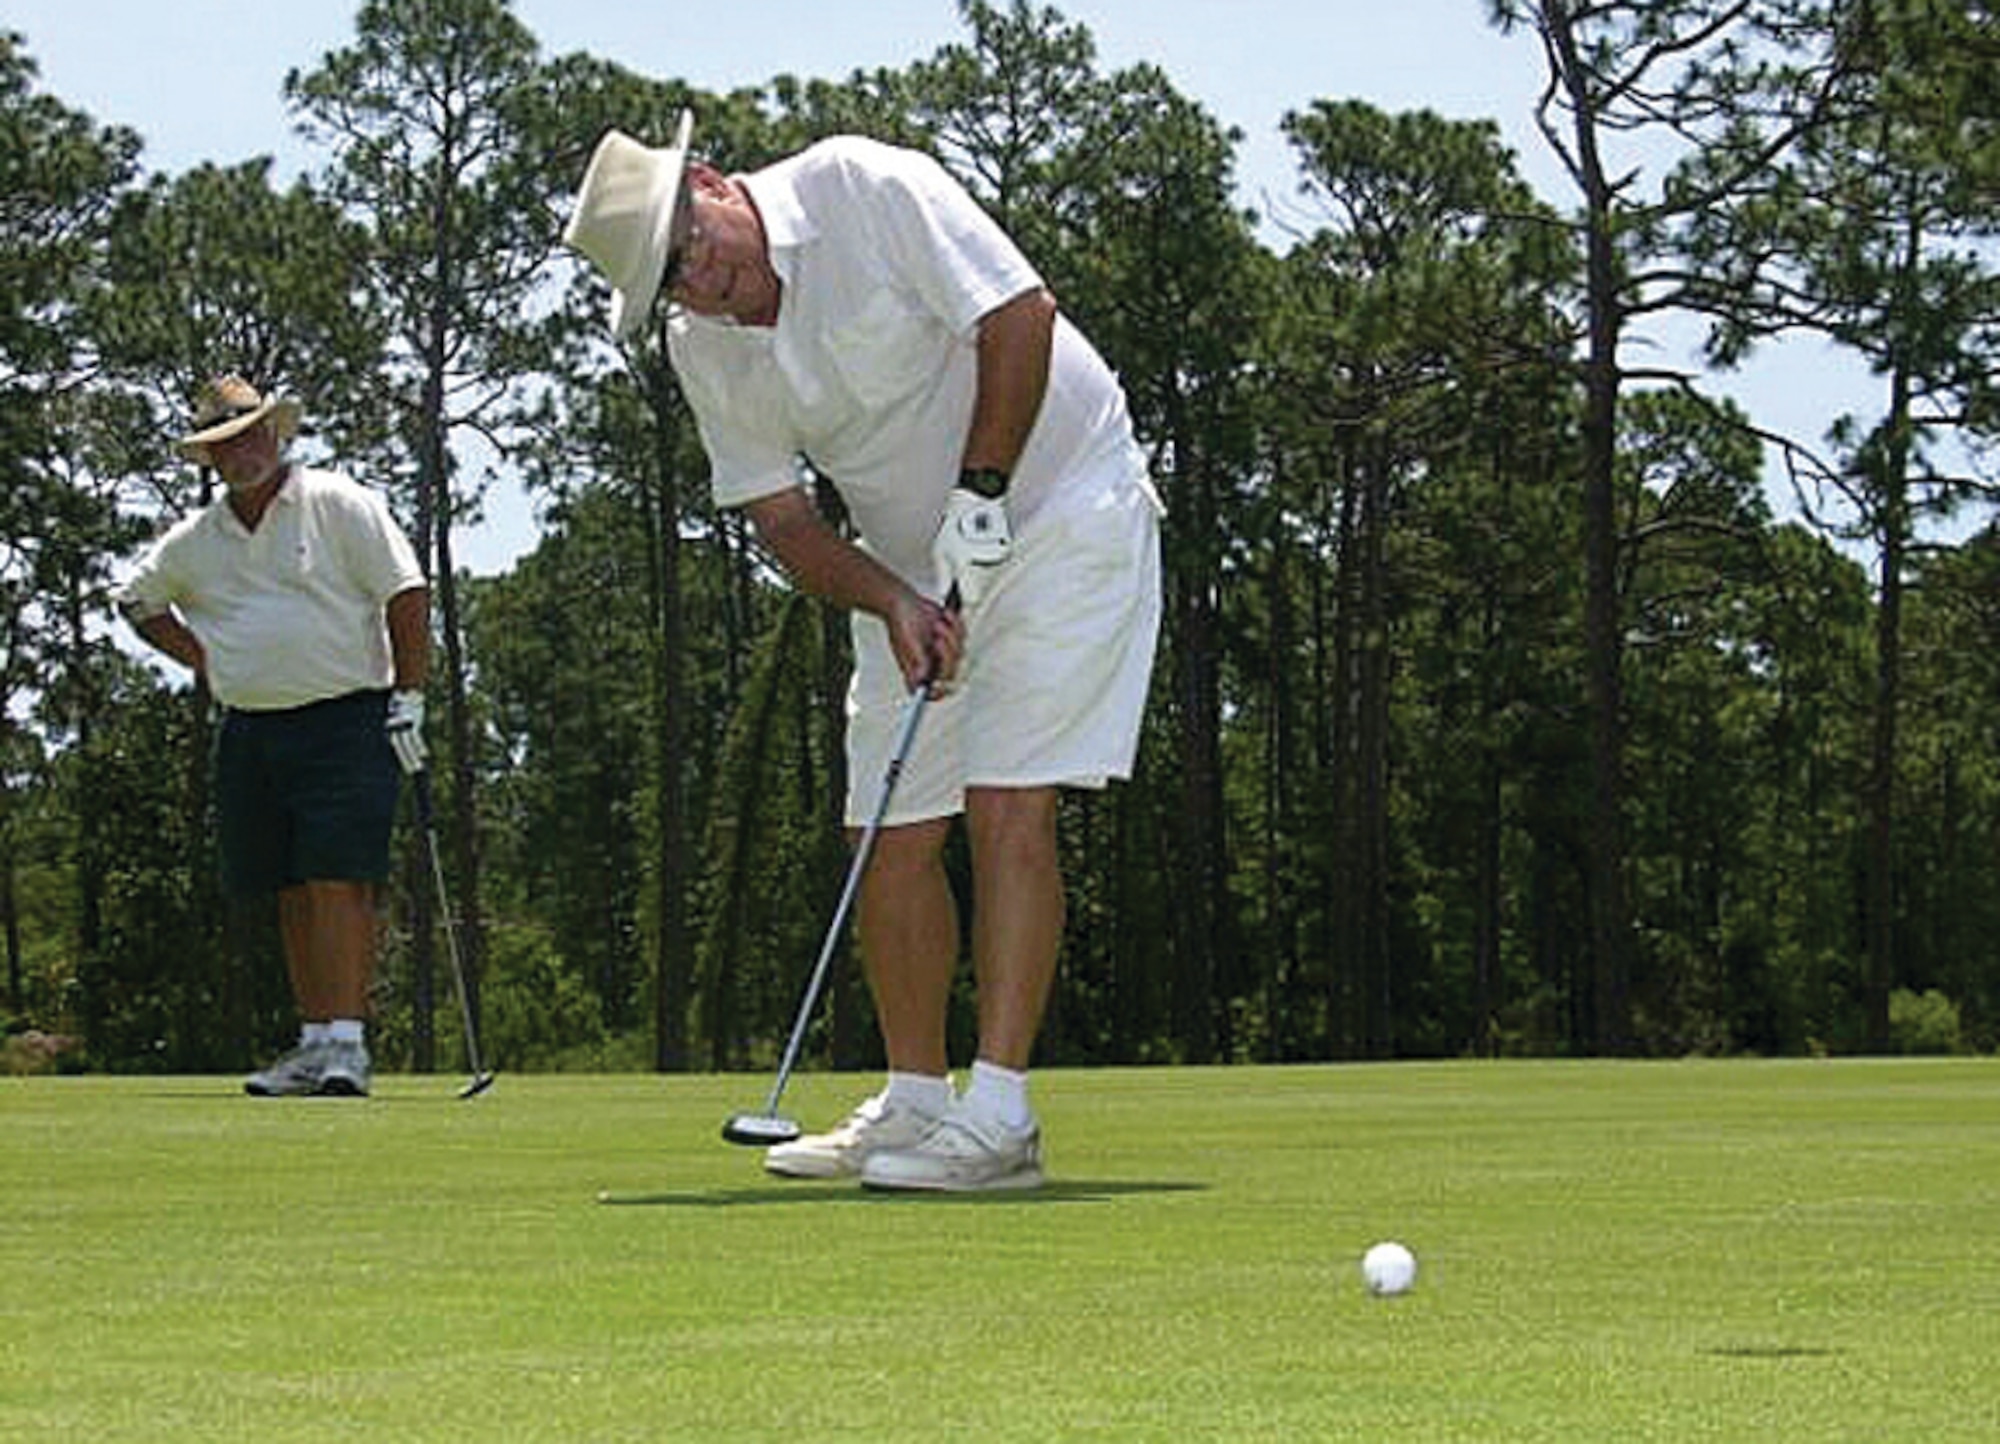 A golfer lines up a putt on one of the new putting greens at Gator Lakes Golf Course. The course re-opened May 25 with all new putting greens and other new programs for golfers. (U.S. Air Force photo by Jon Ortiz)